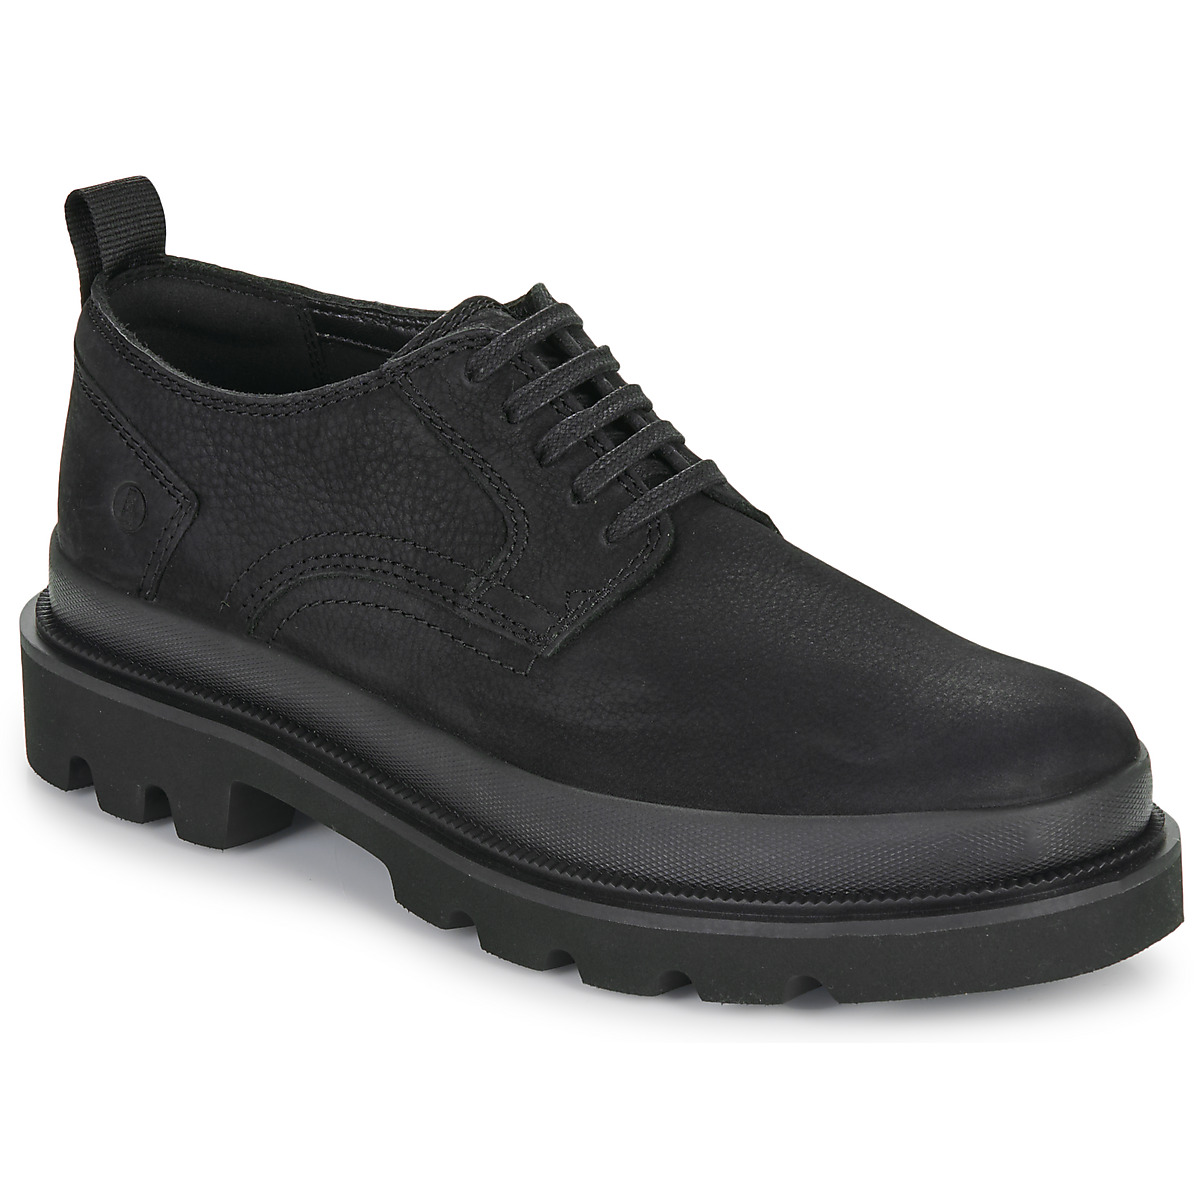 Clarks Noir BADELL LACE 44s6VoBY